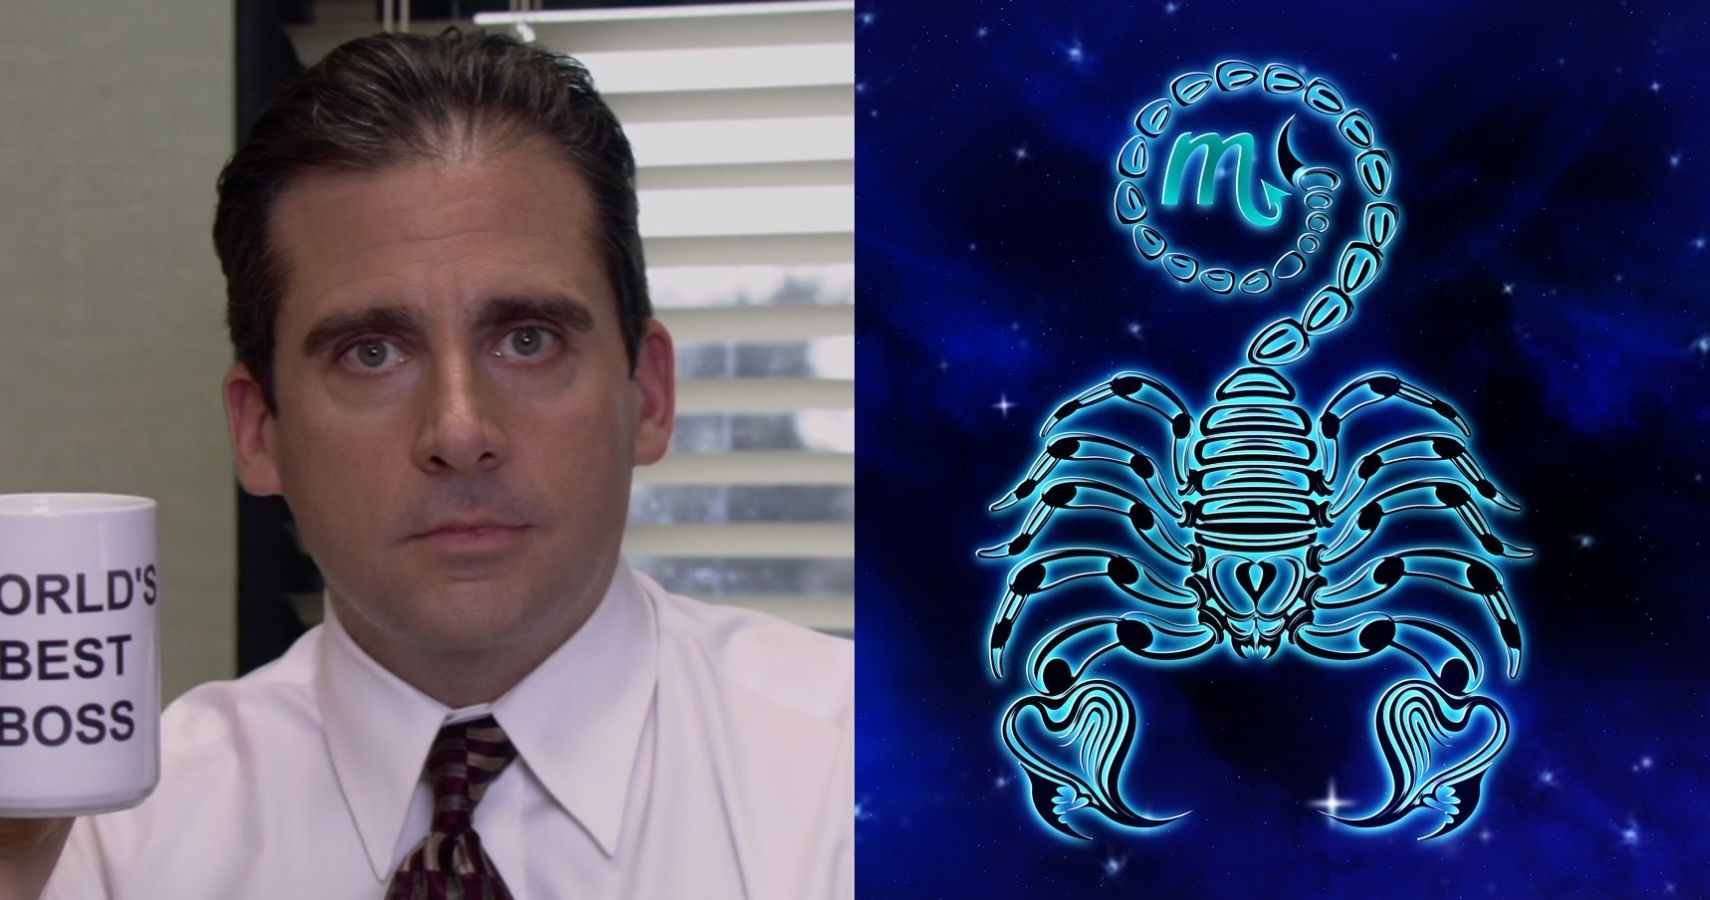 The Office What Job Would You Have At Dunder Mifflin Based On Your Zodiac